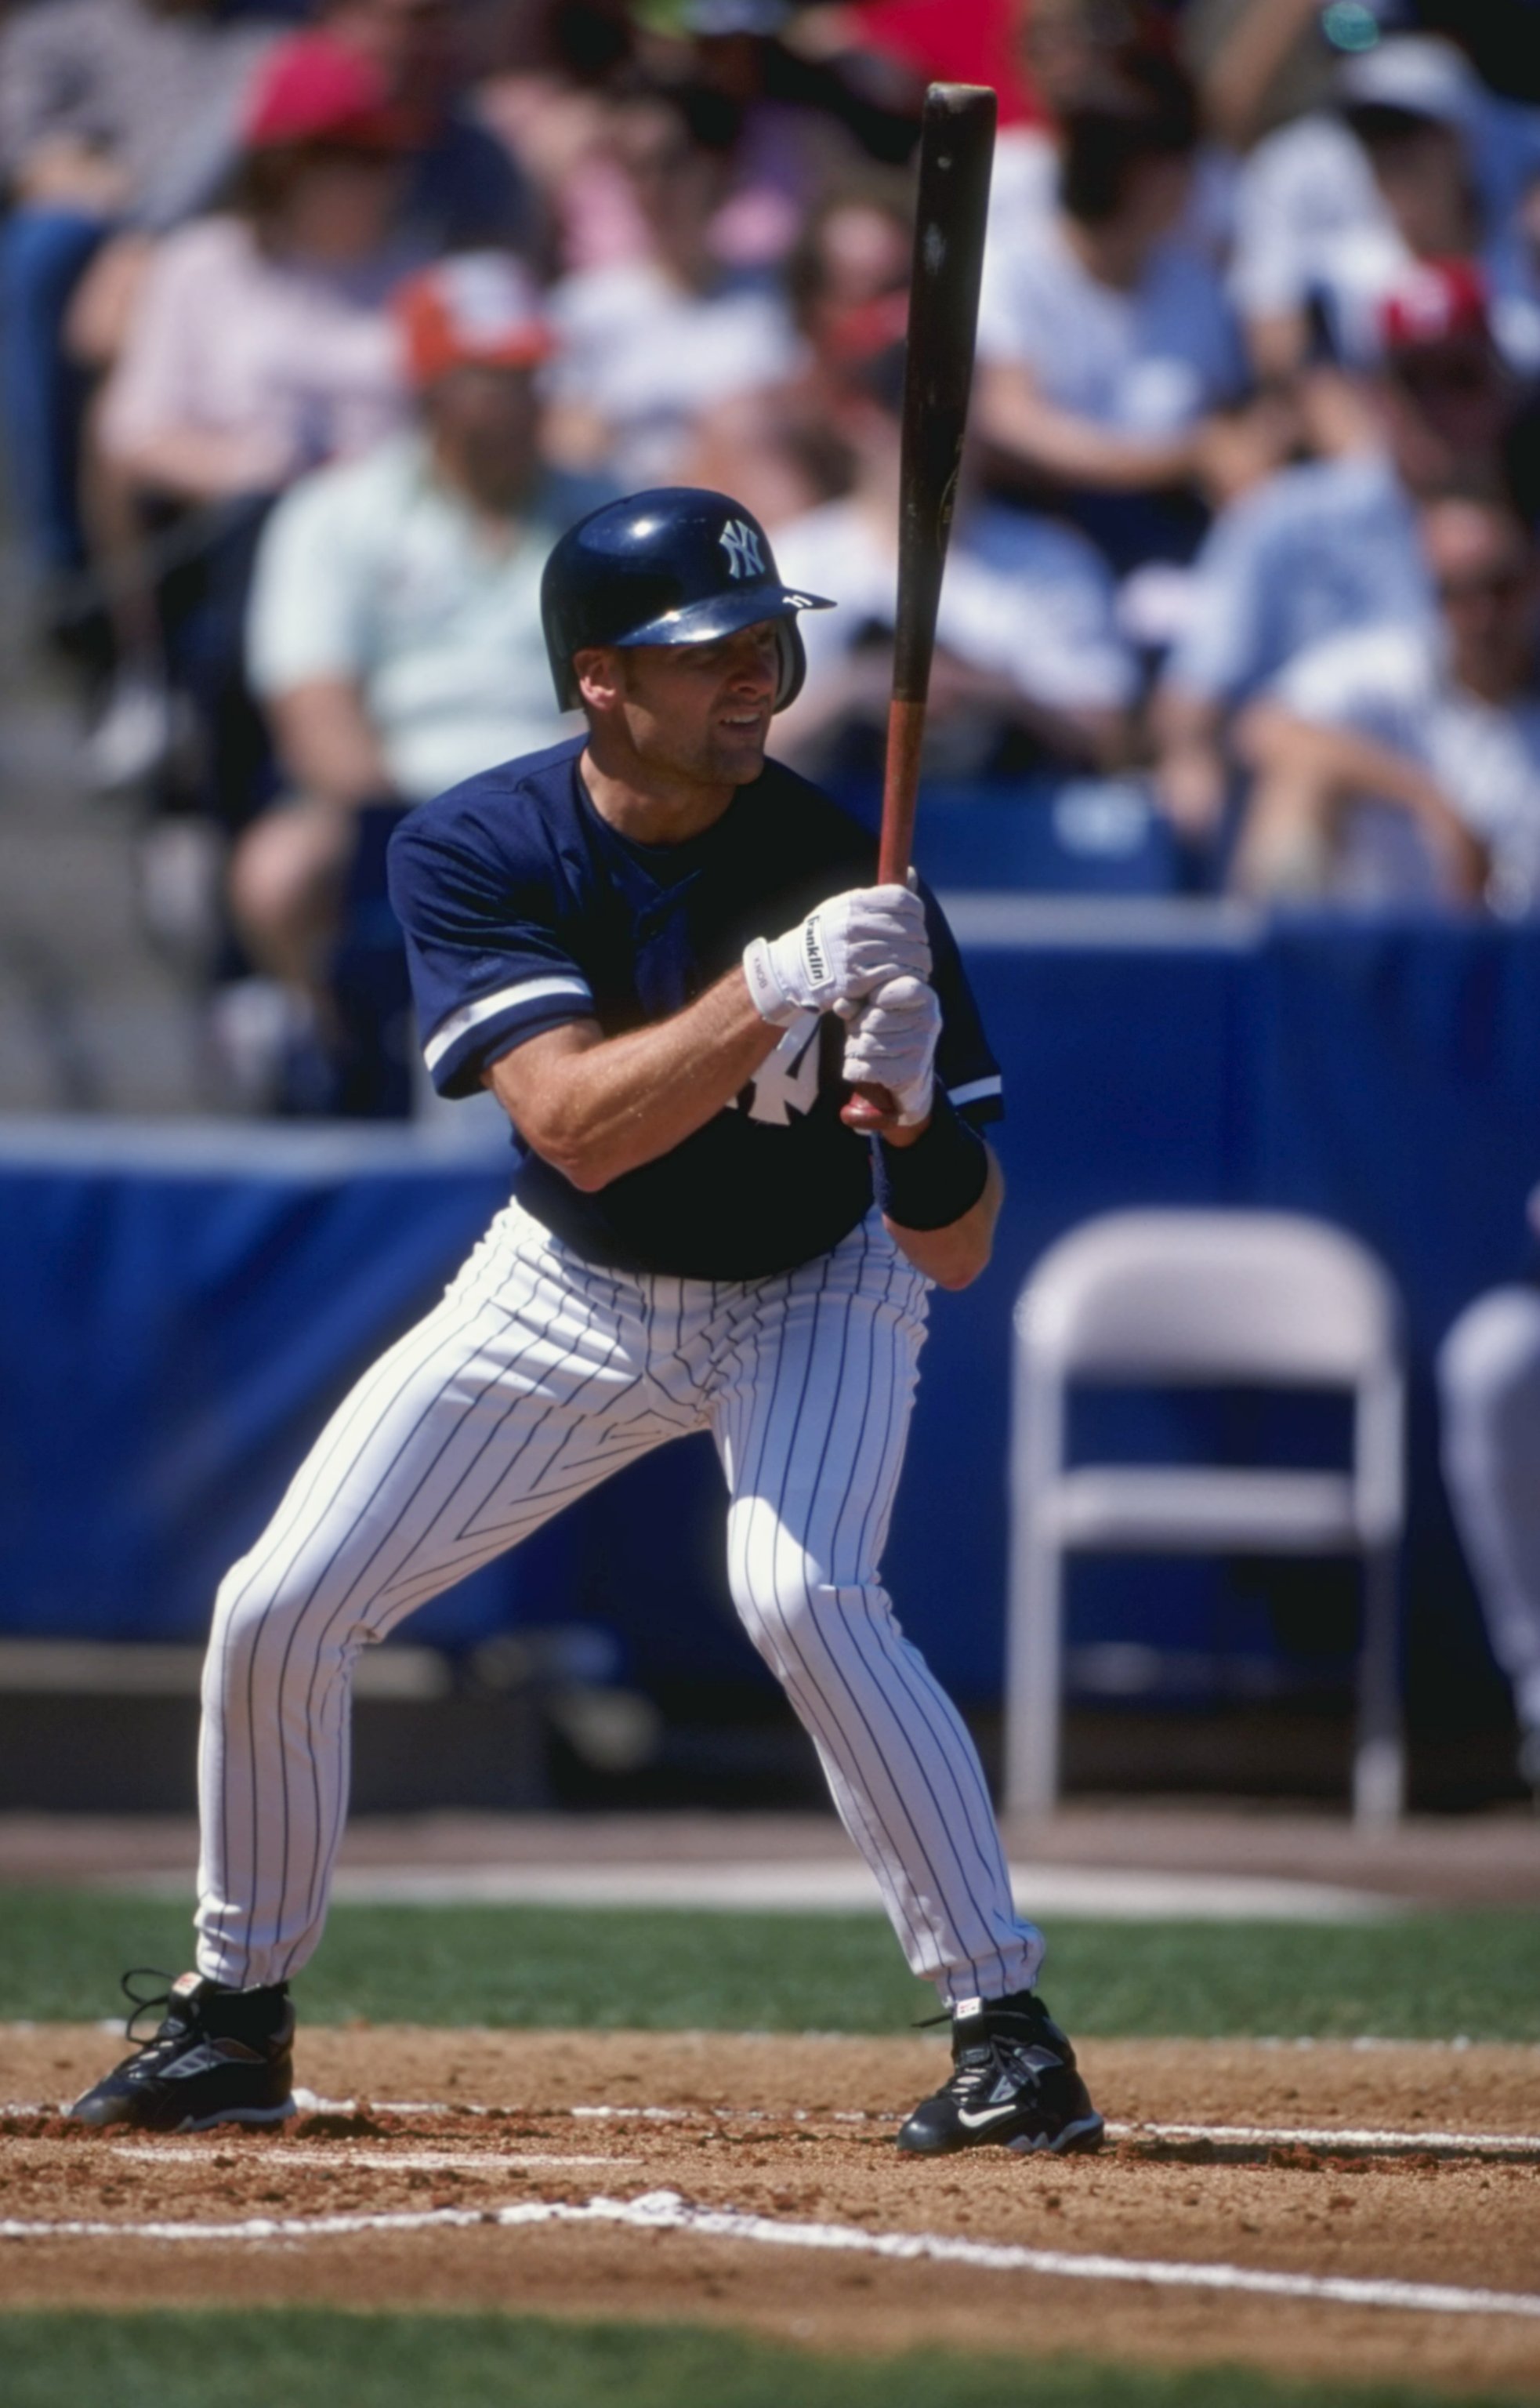 6 Mar 1999: Infielder Chuck Knoblaunch #11 of the New York Yankees at bat during the Spring Training game against the Boston Red Sox at Legends Field in Tampa, Florida. The Red Sox defeated the Yankees 7-4.